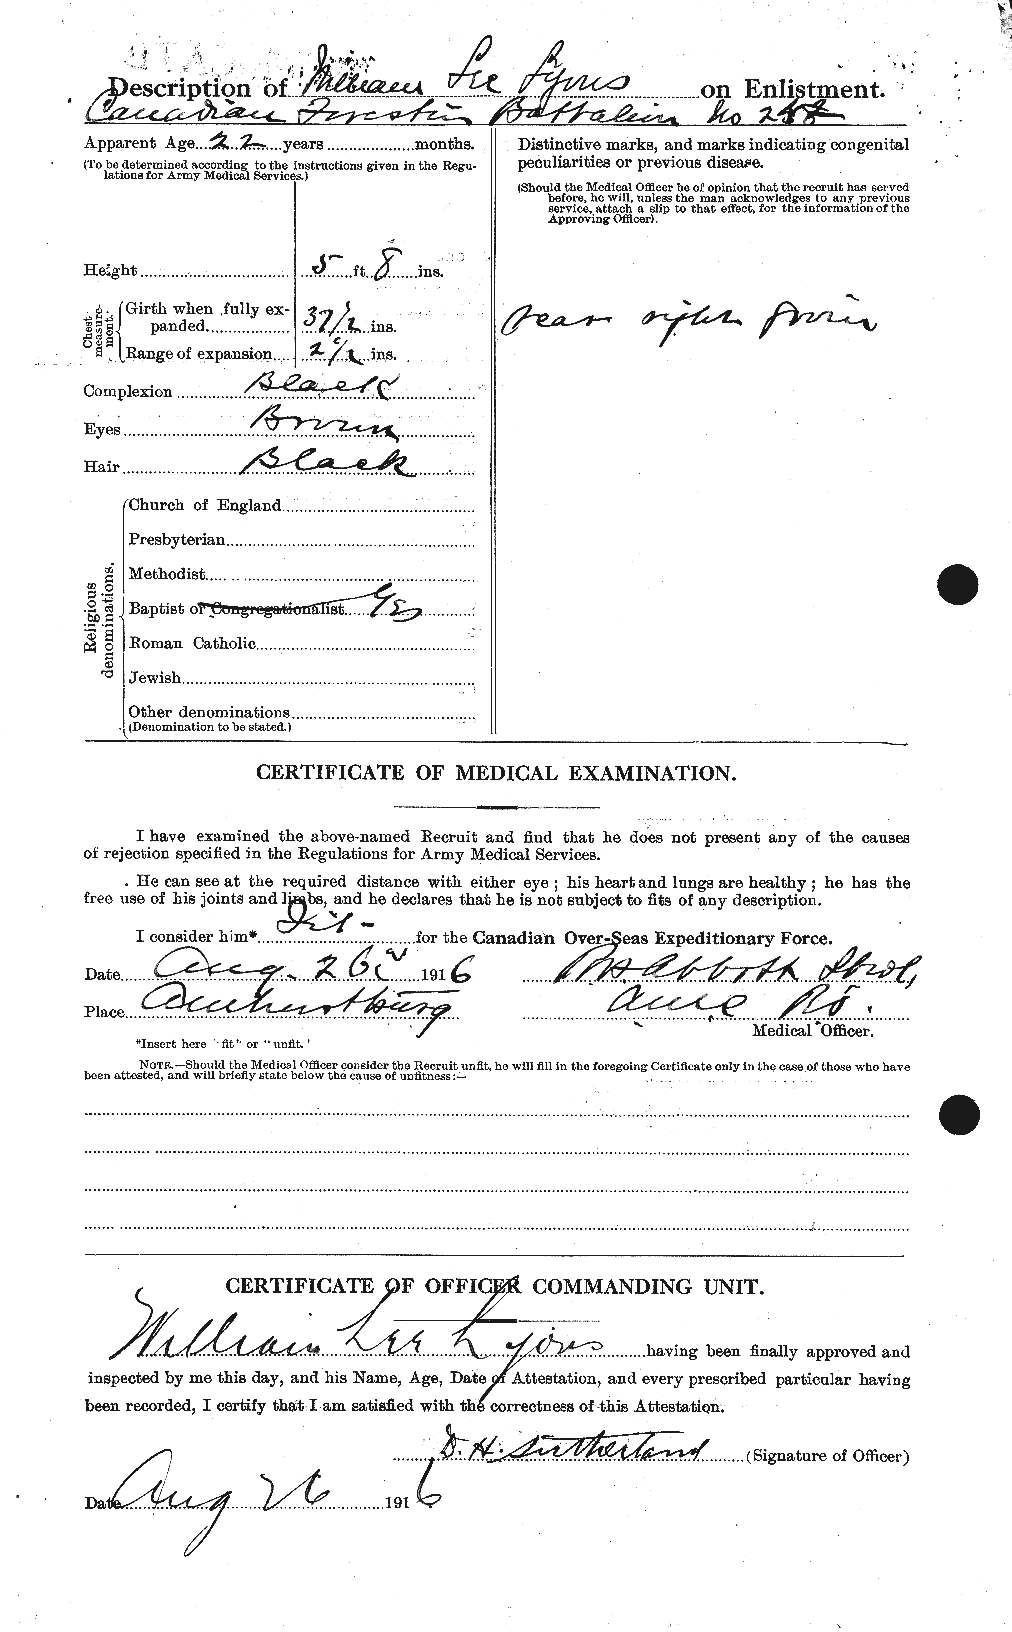 Personnel Records of the First World War - CEF 474907b